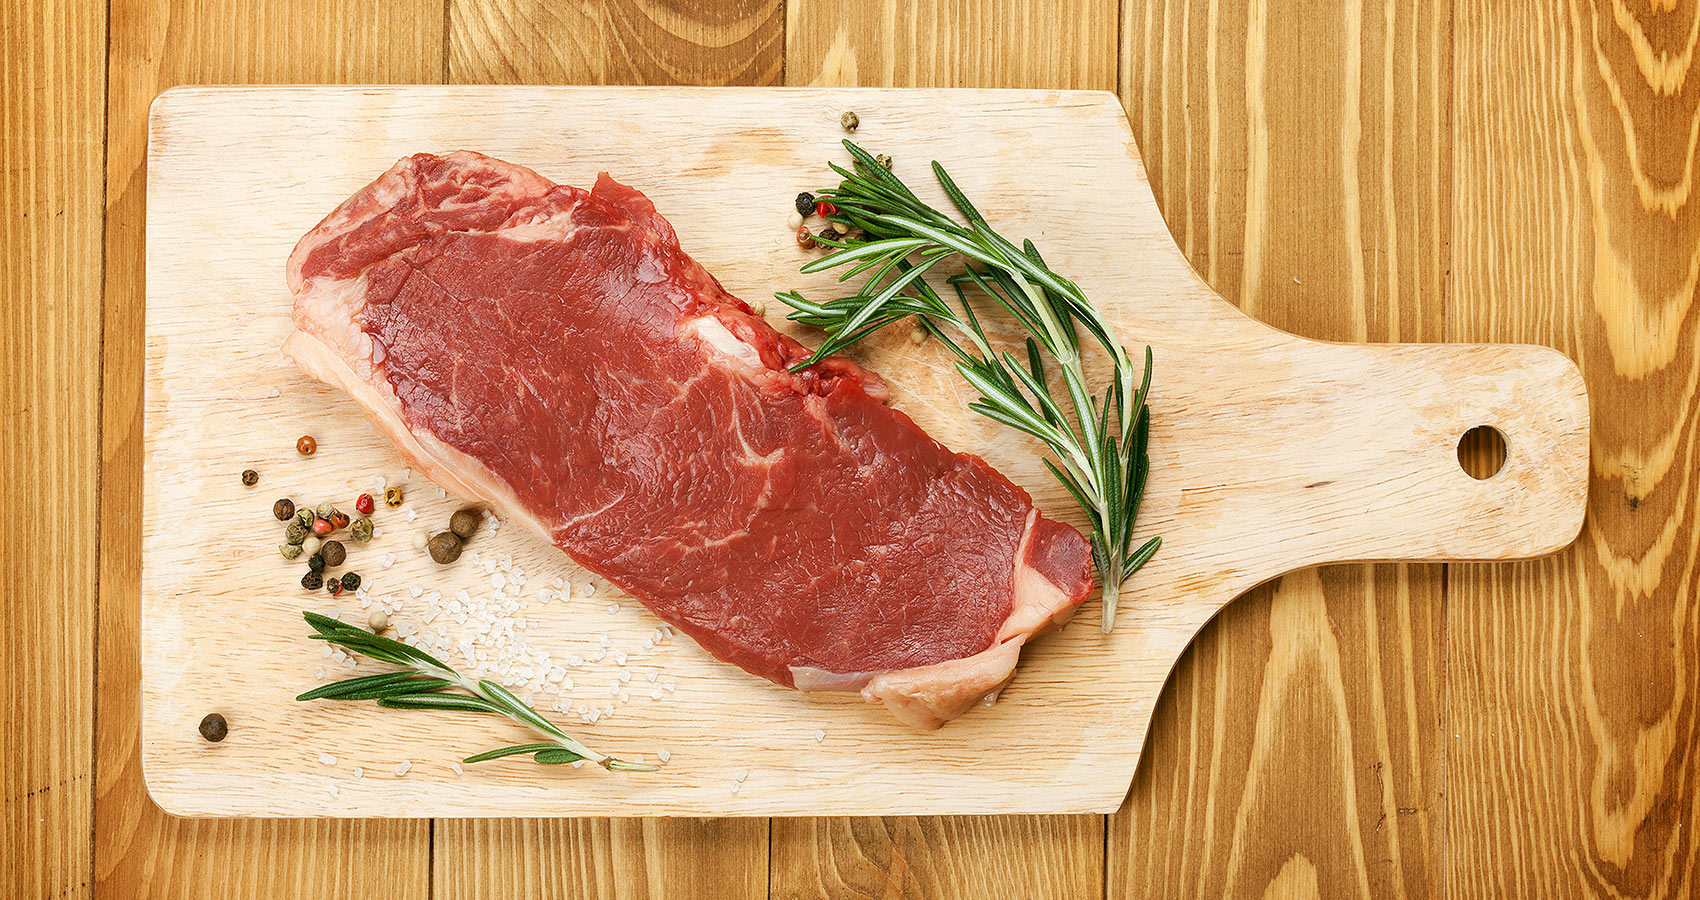 avoid puncturing meat to keep the juices in